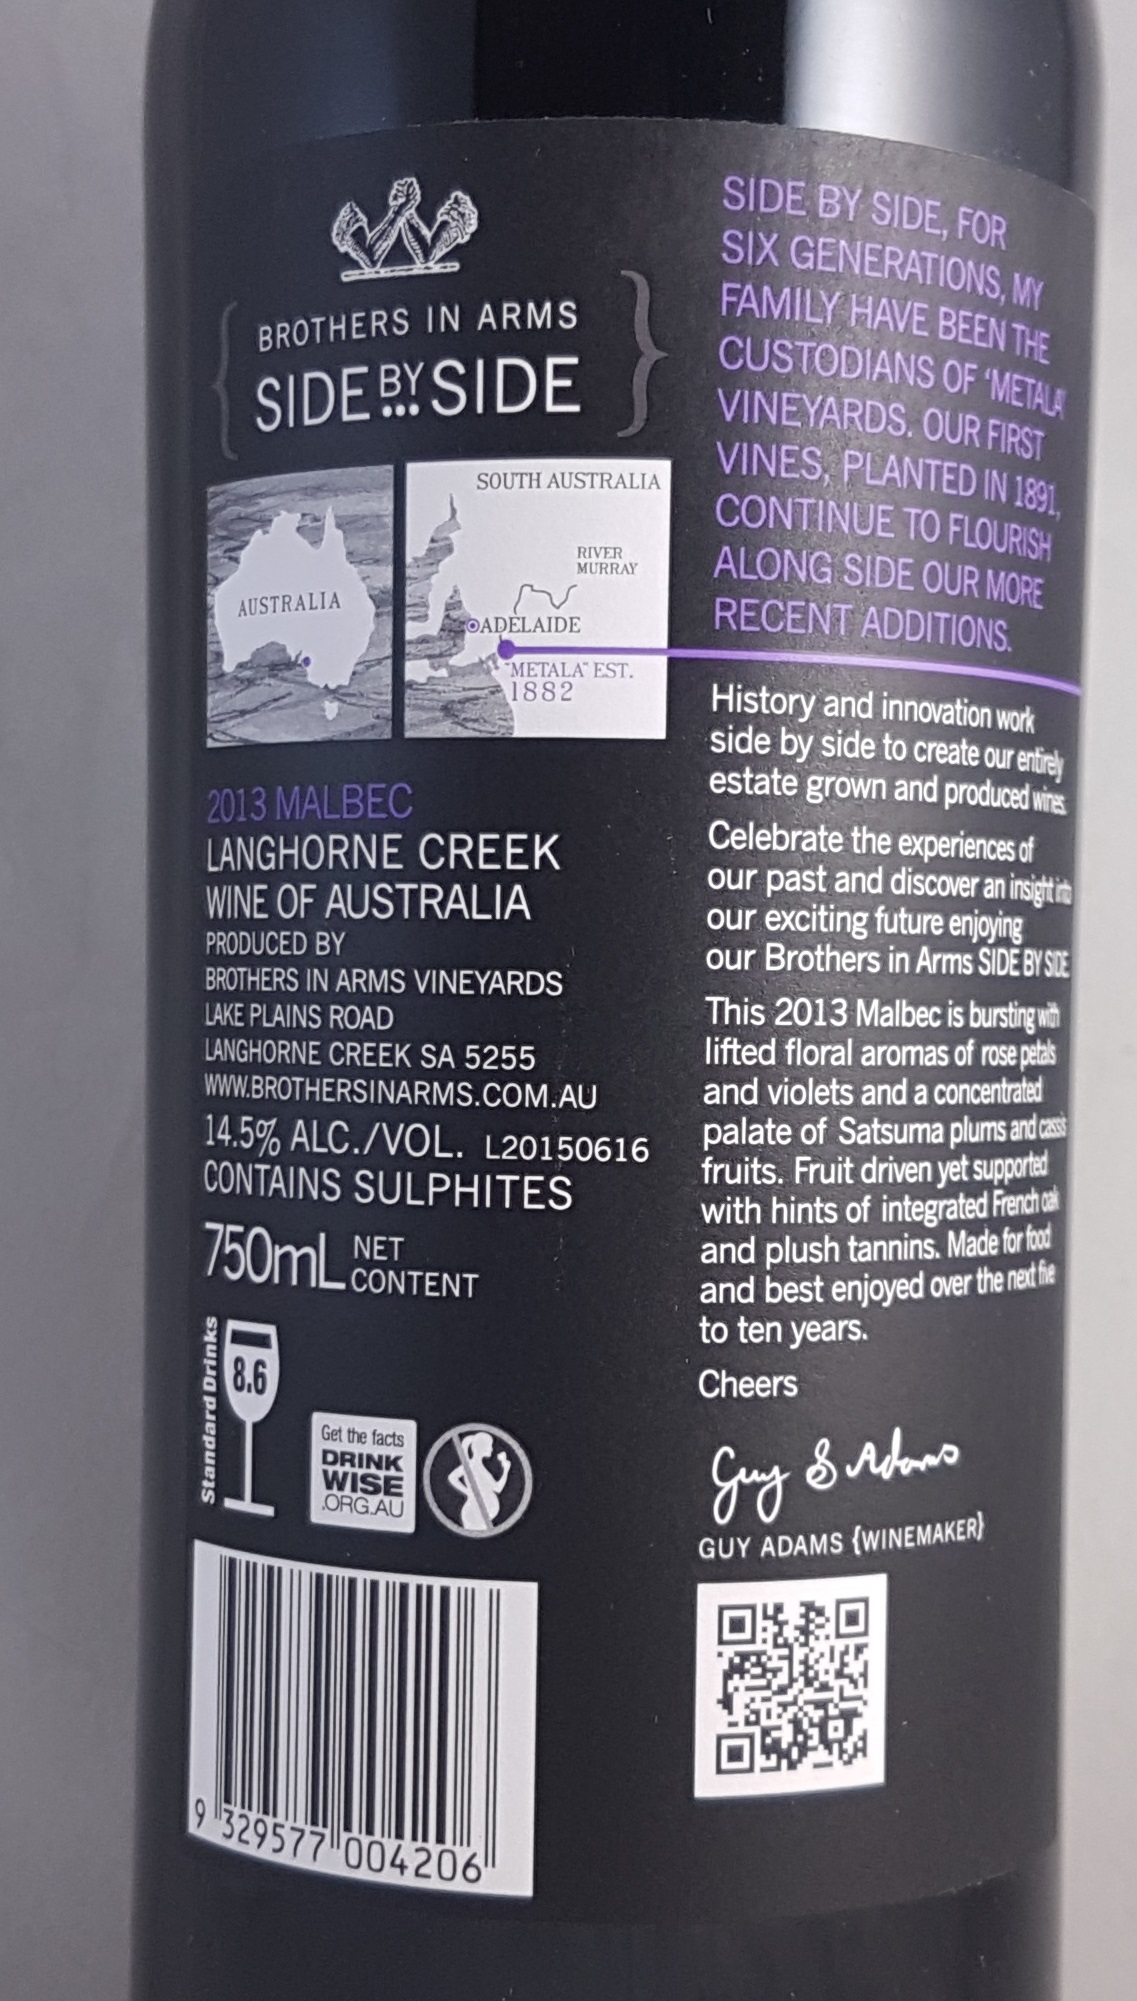 Brothers in Arms Side By Side Langhorne Creek Malbec 2013 Back Label